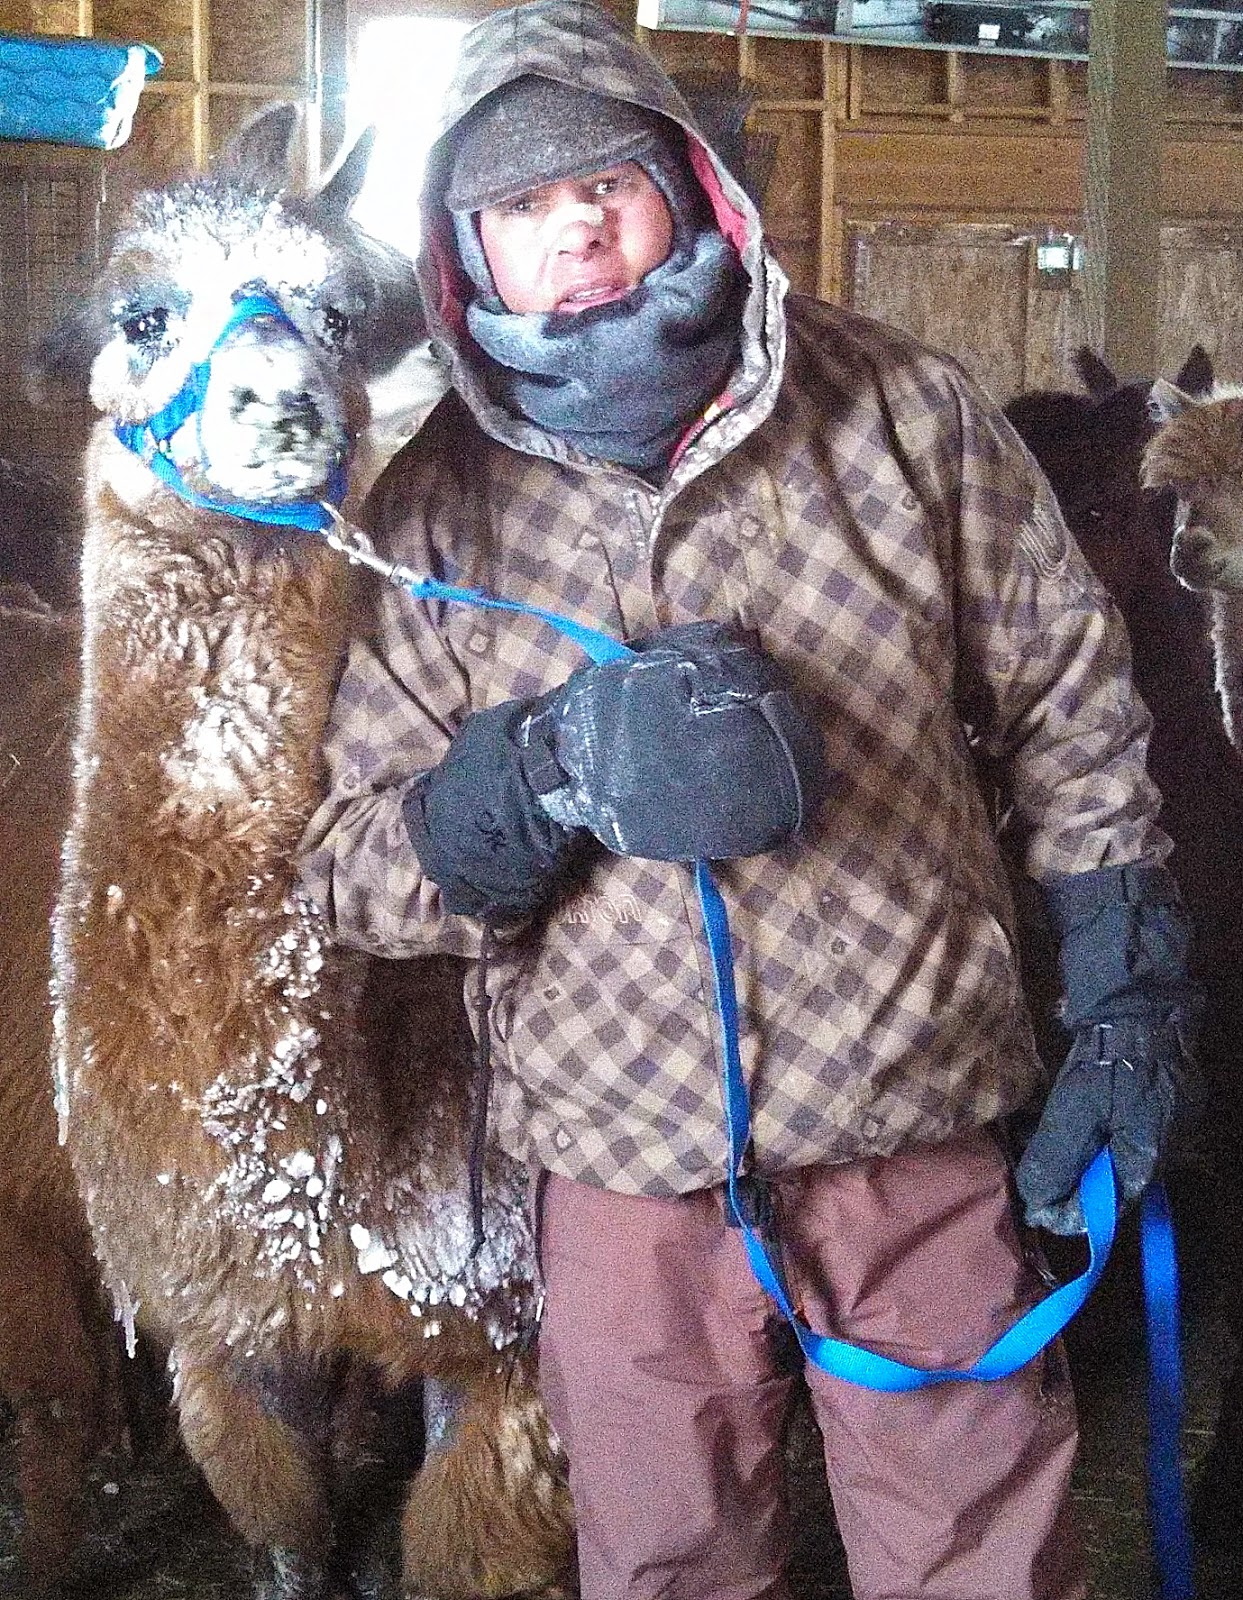 James Budd and Snuffy the llama freezing on a snowy winter day